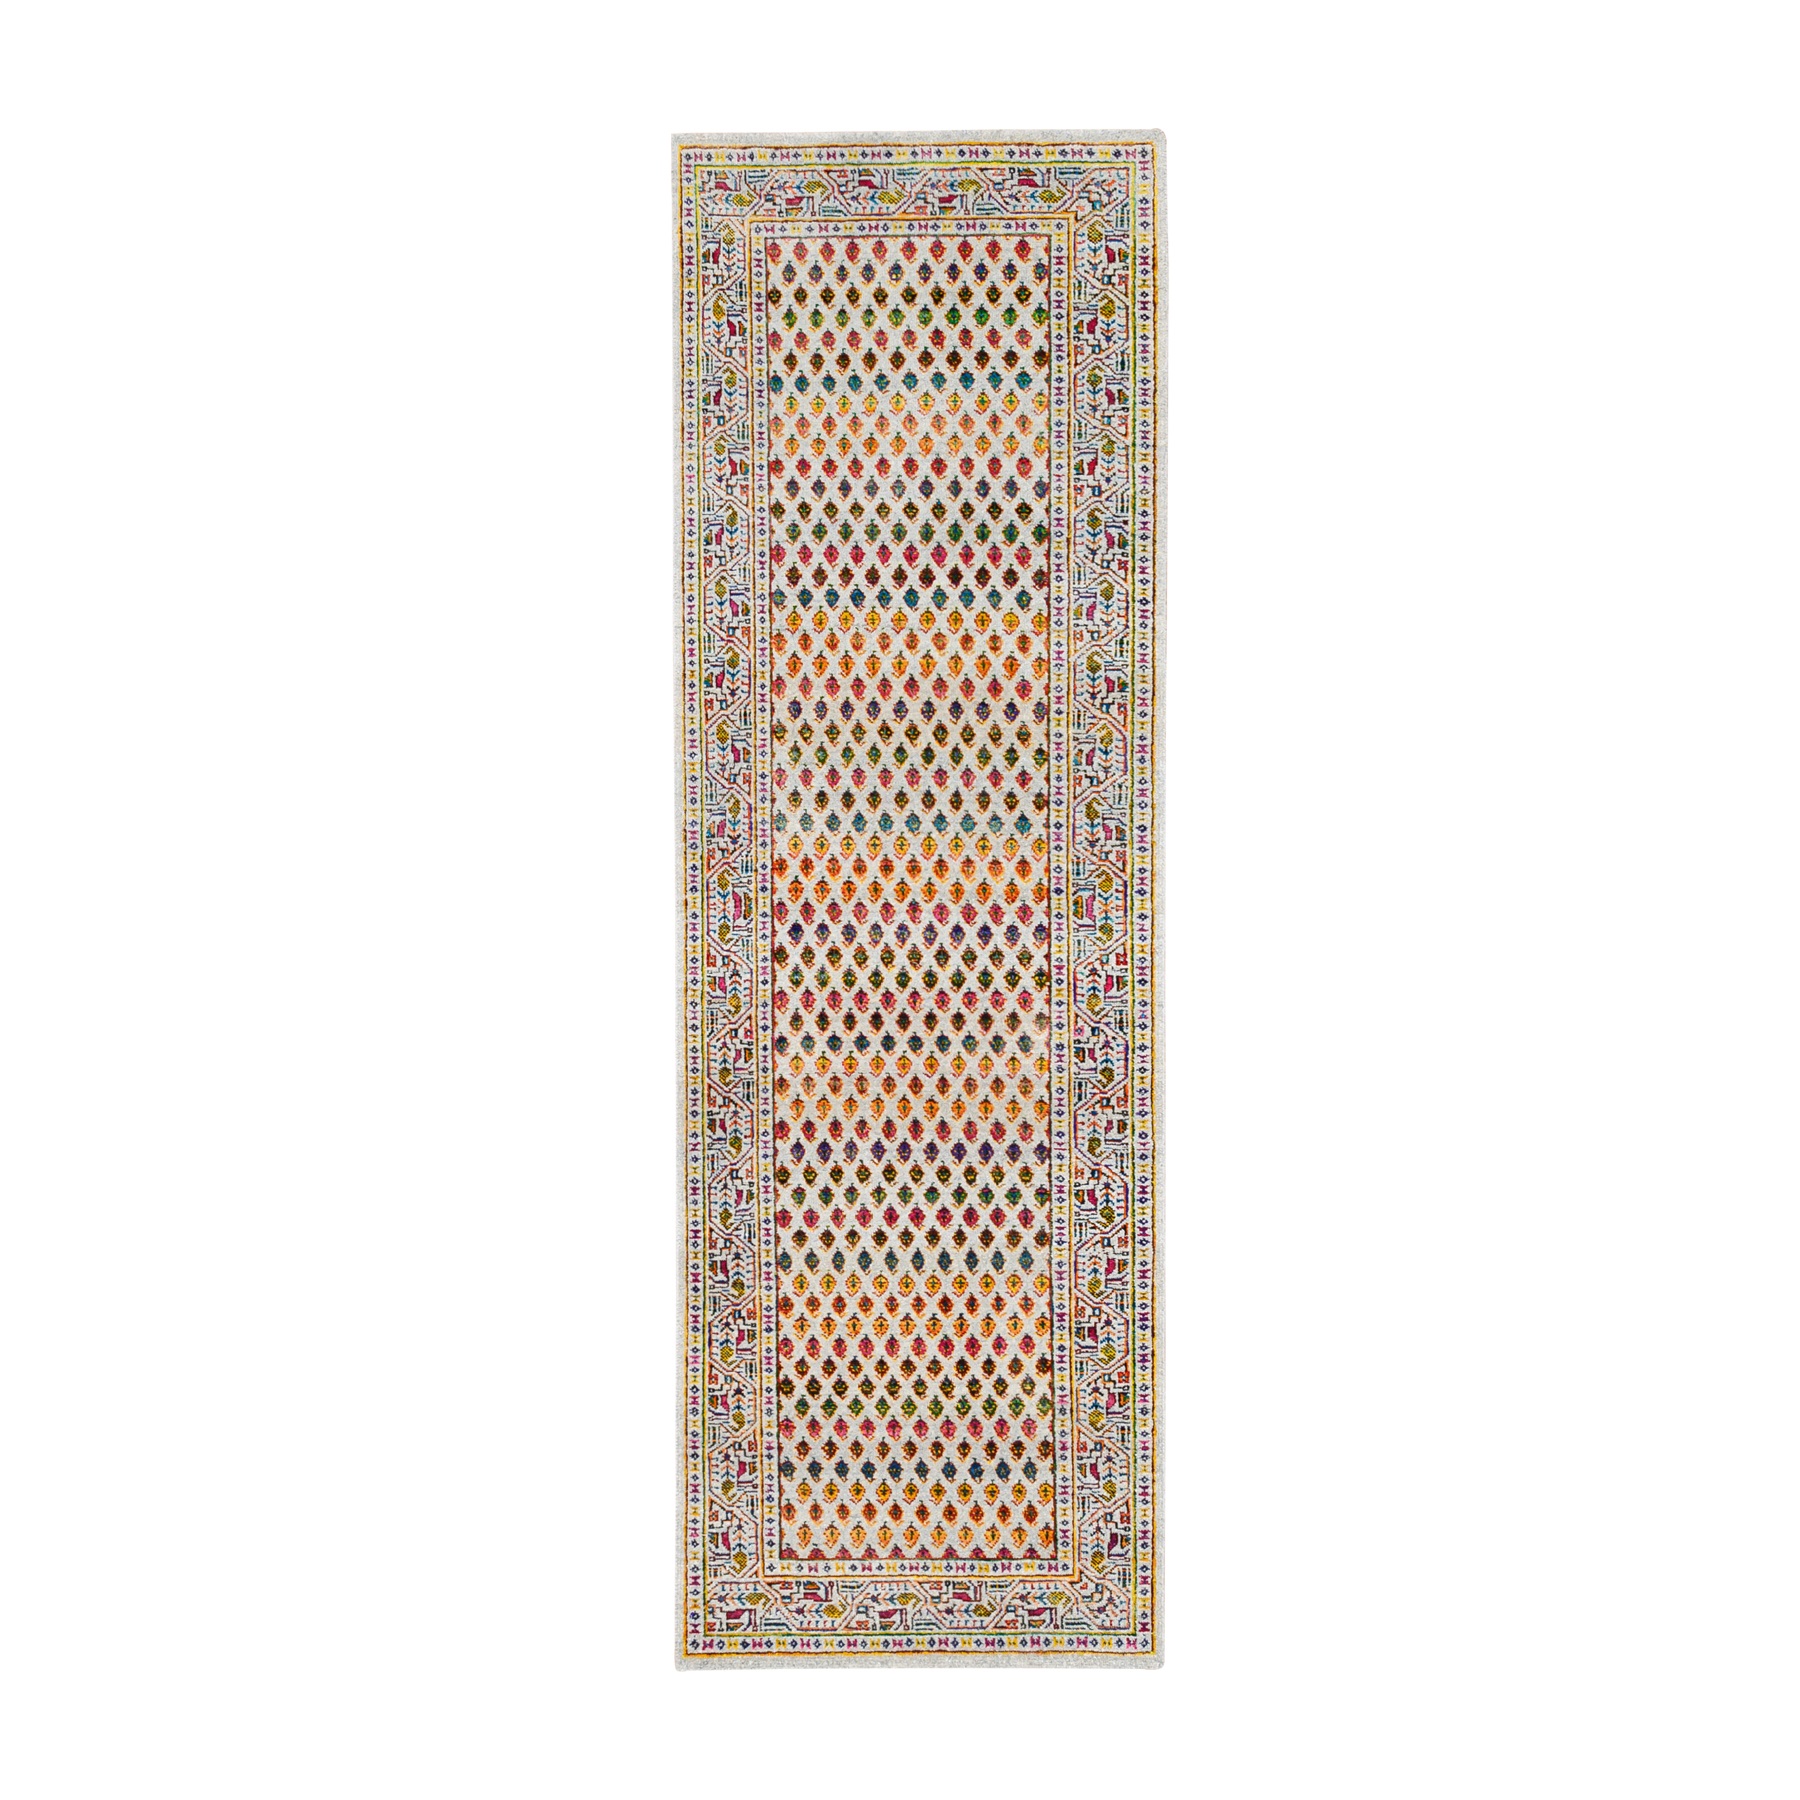 2'6"x8'1" Colorful Wool And Sari Silk Sarouk Mir Inspired With Small Boteh Design Hand Woven Oriental Runner Rug 